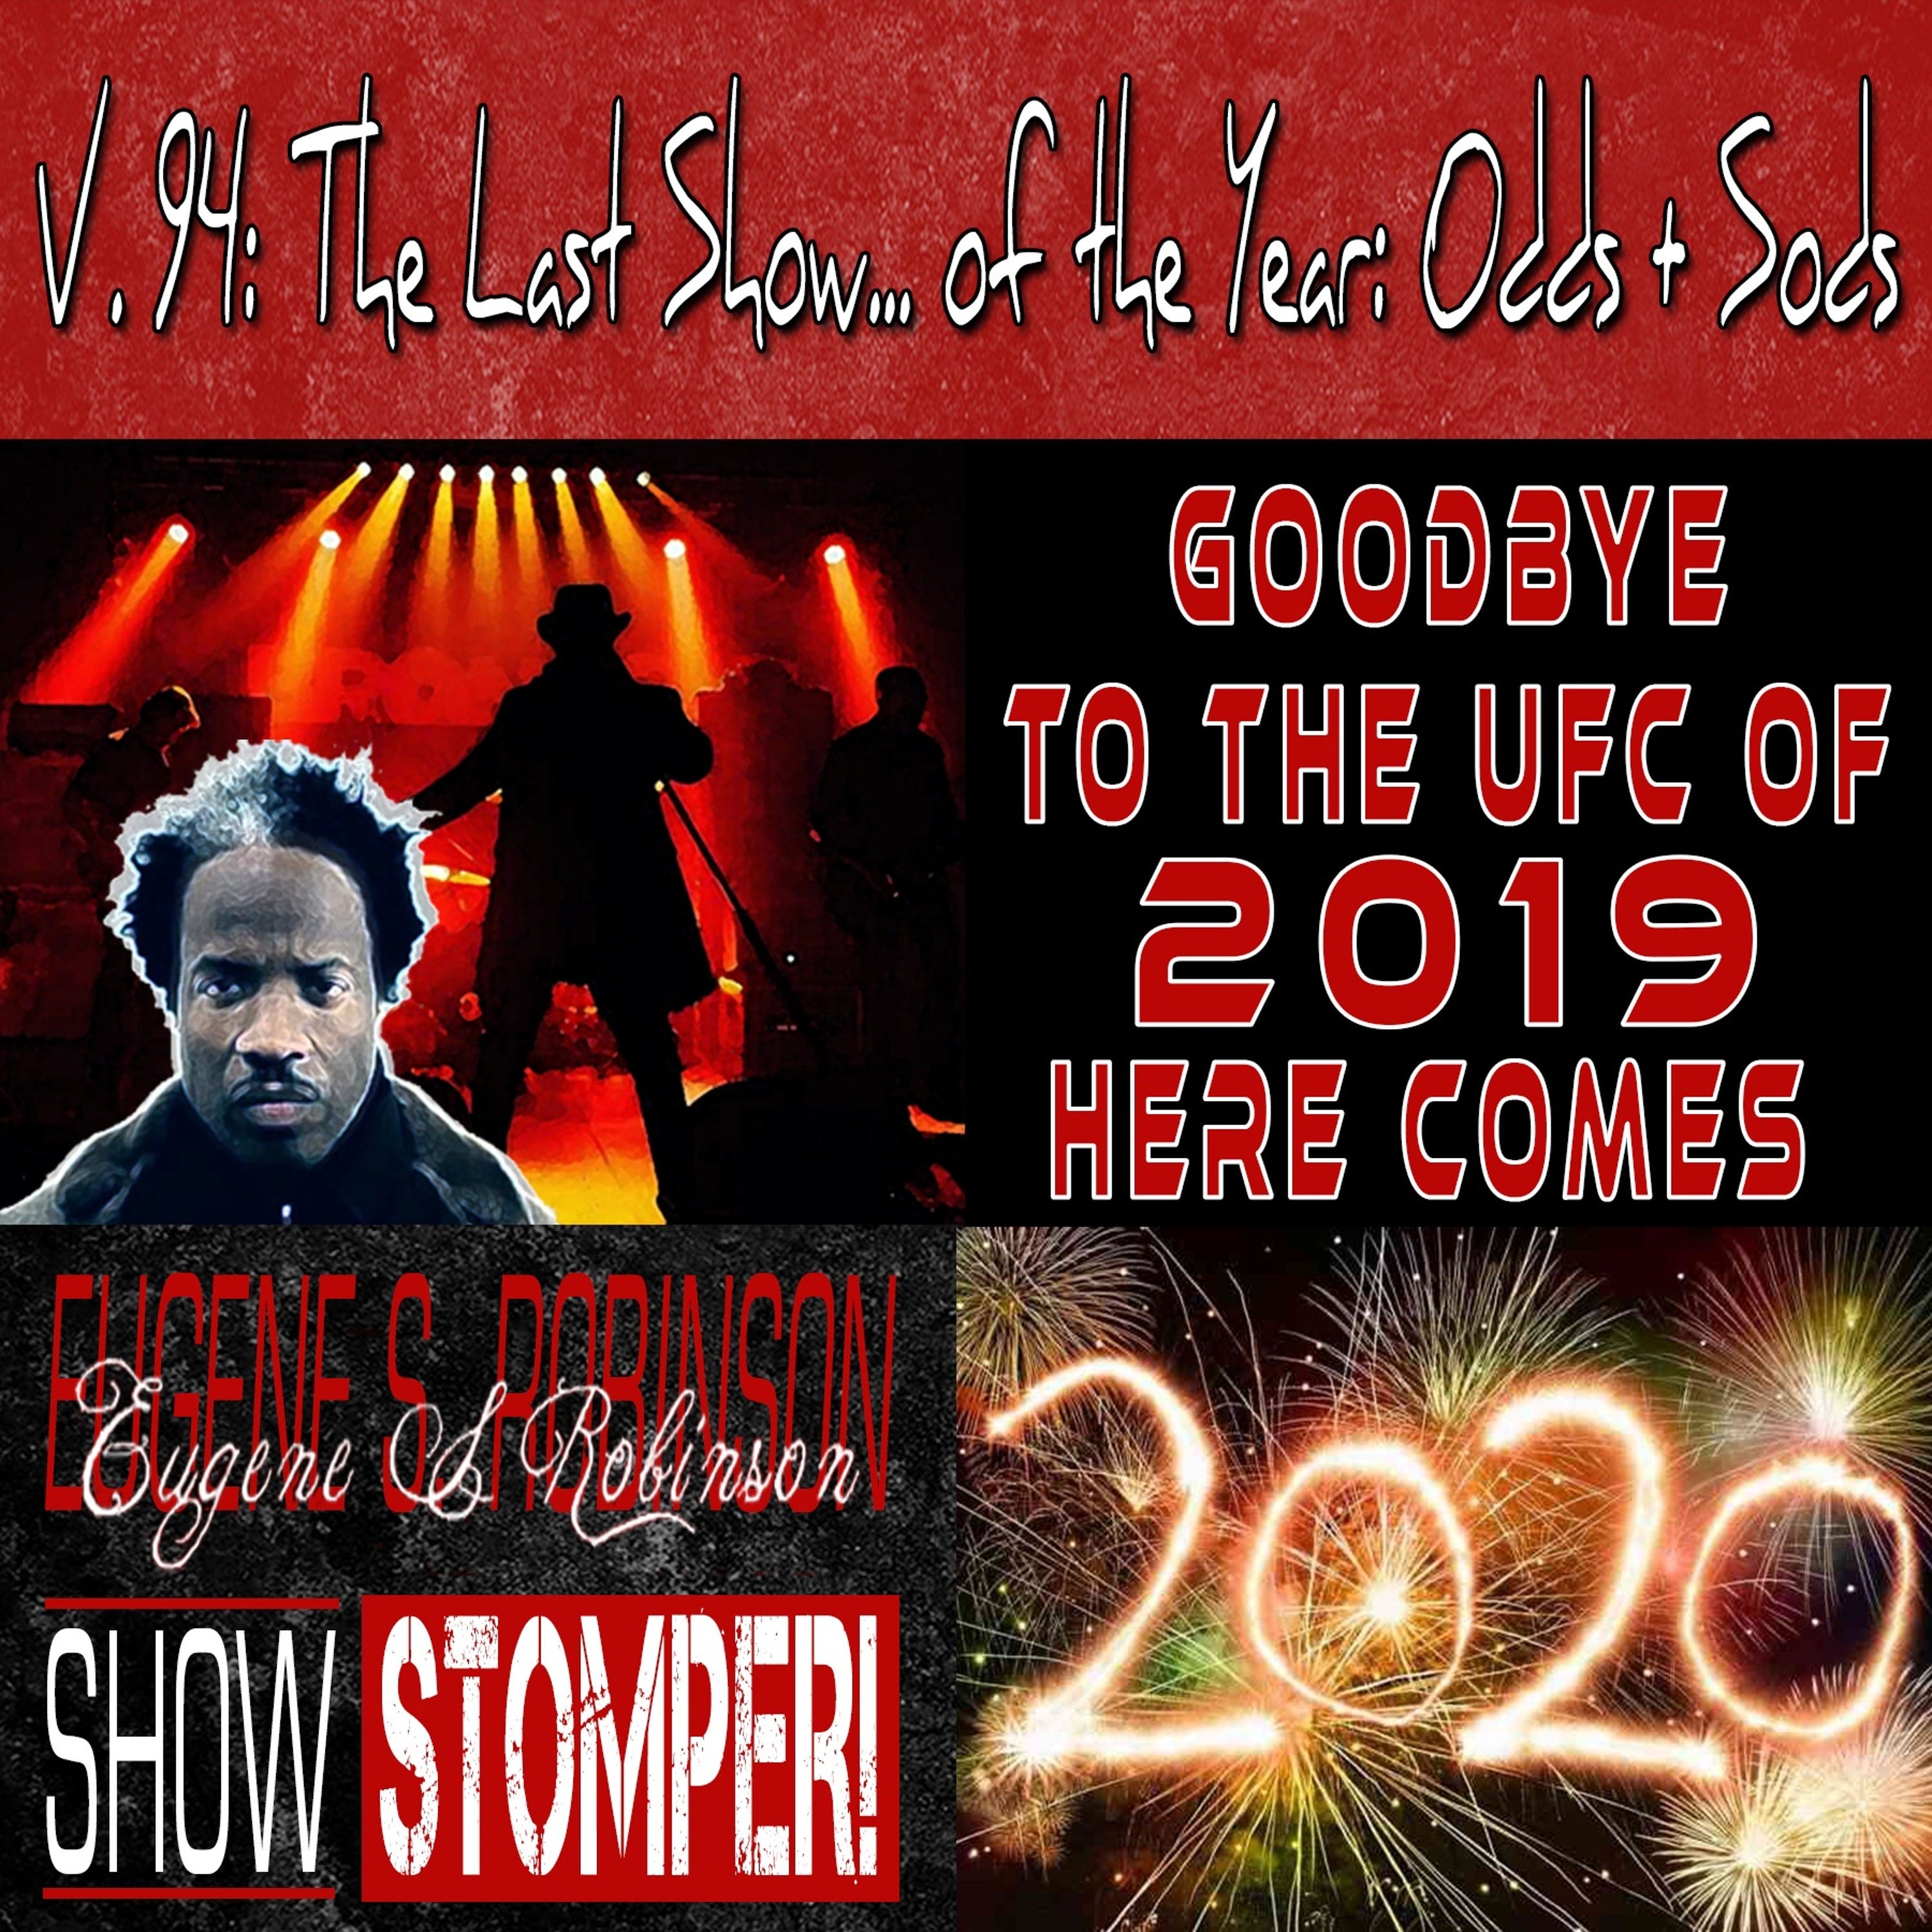 V. 94 The Last Show...of The Year Odds + Sods On The Eugene S. Robinson Show Stomper!